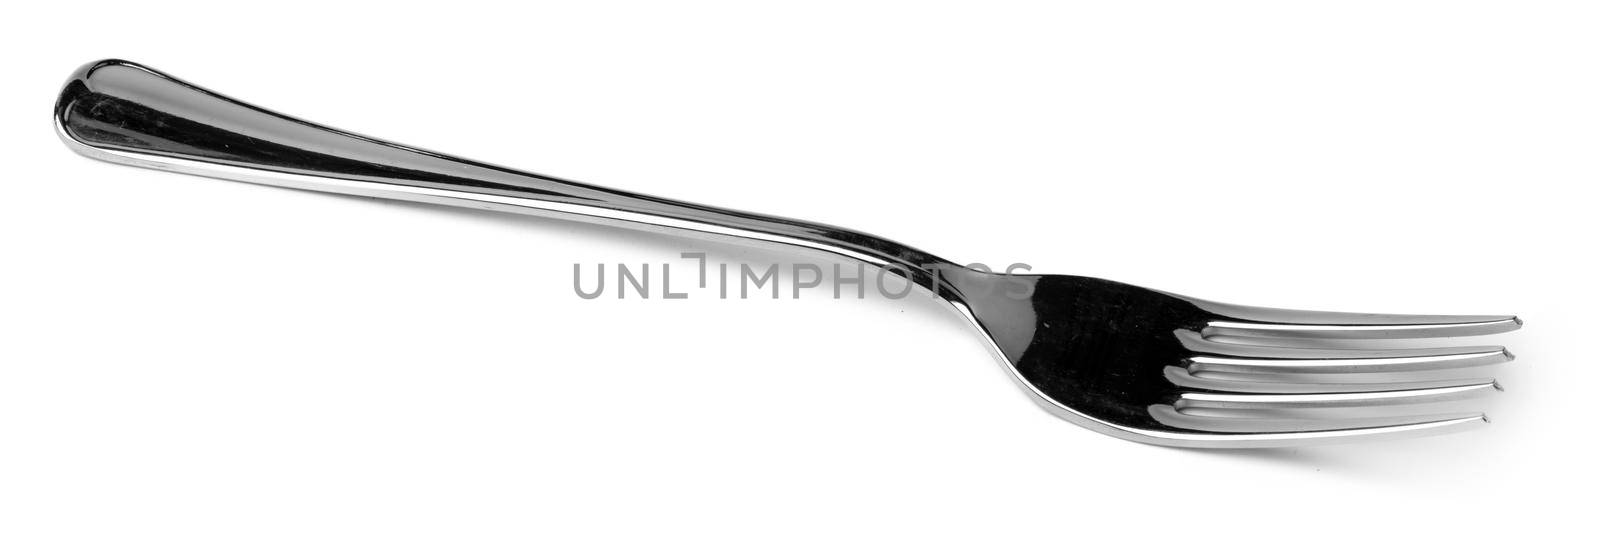 Silver dining fork isolated on white background by Fabrikasimf